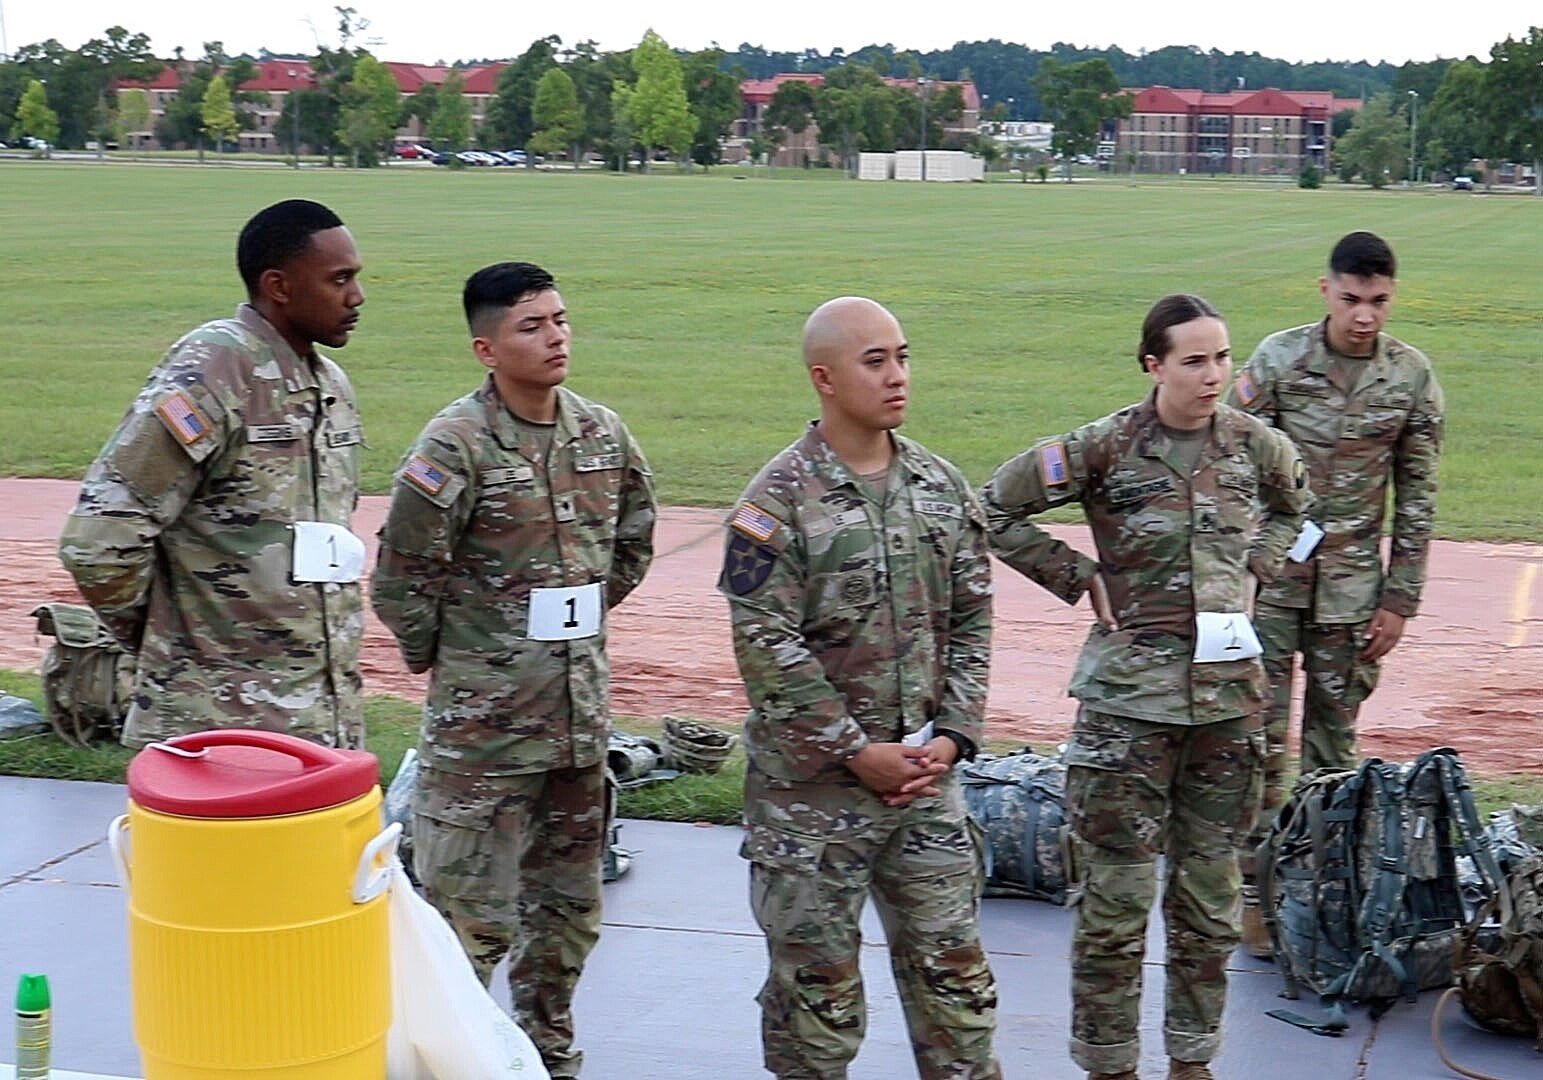 Army Cyber Command selects top team in its first Best Squad Competition